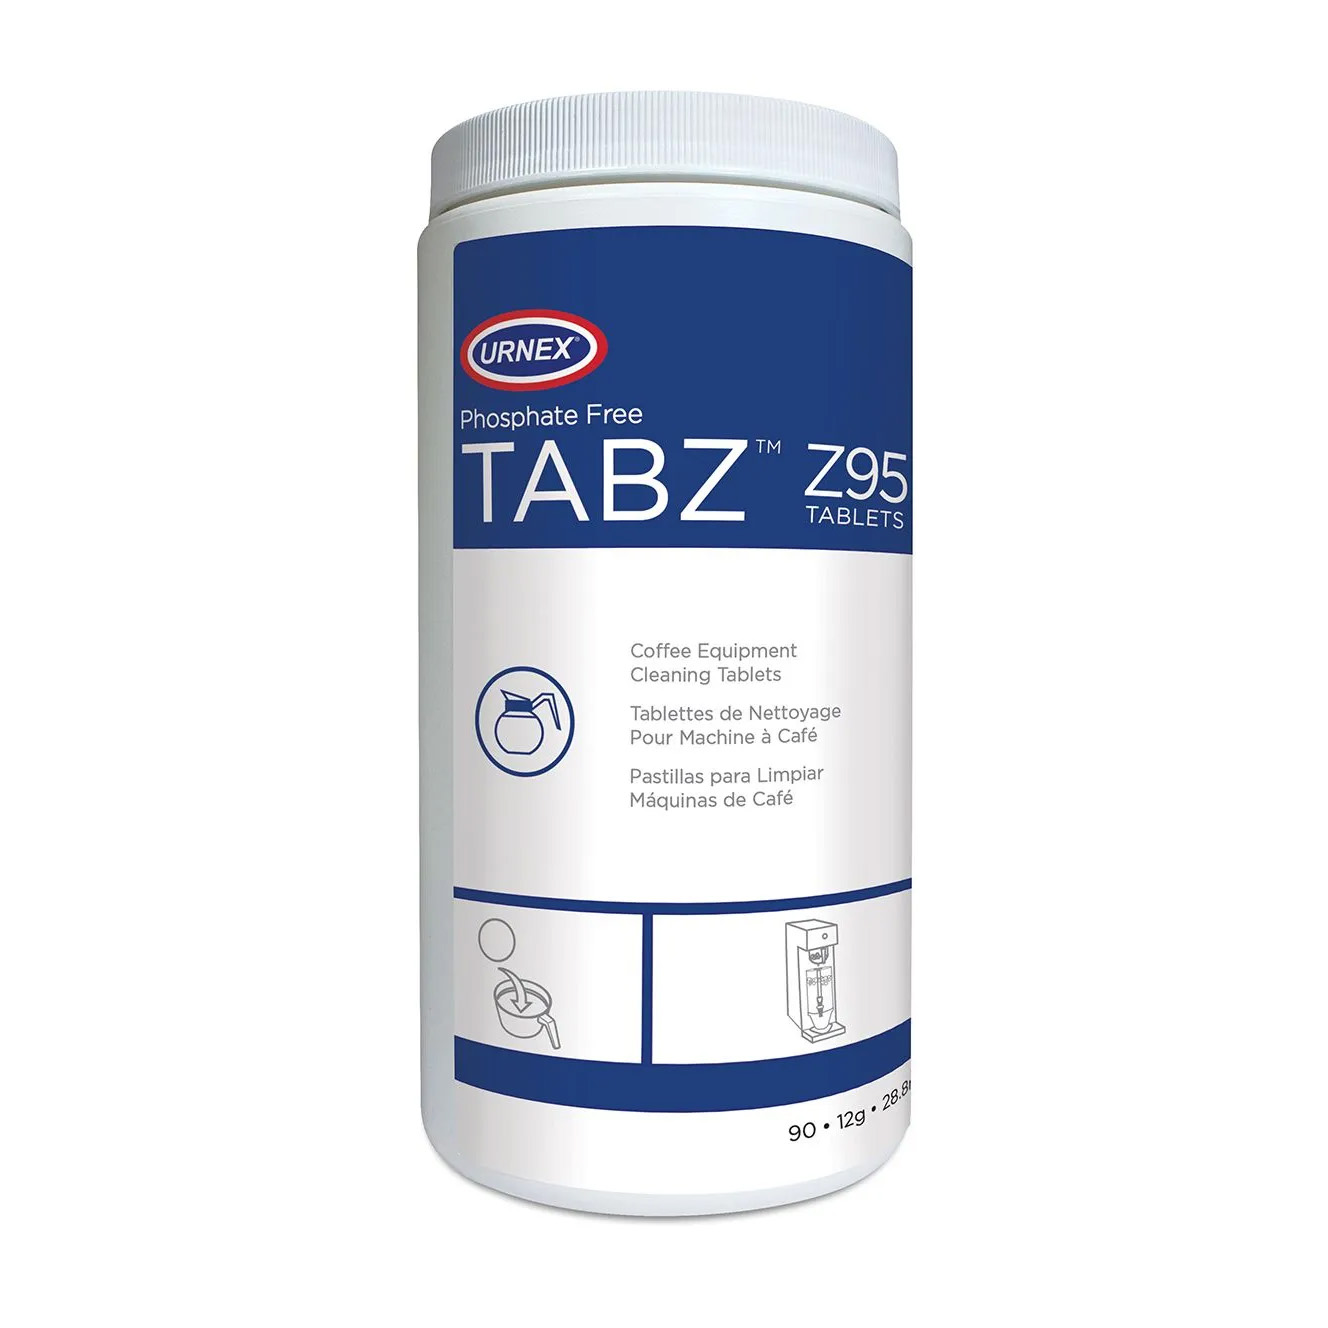 Urnex TABZ Z95 COFFEE Equipment Cleaning 12g Tablets - 90 Tablet Jar